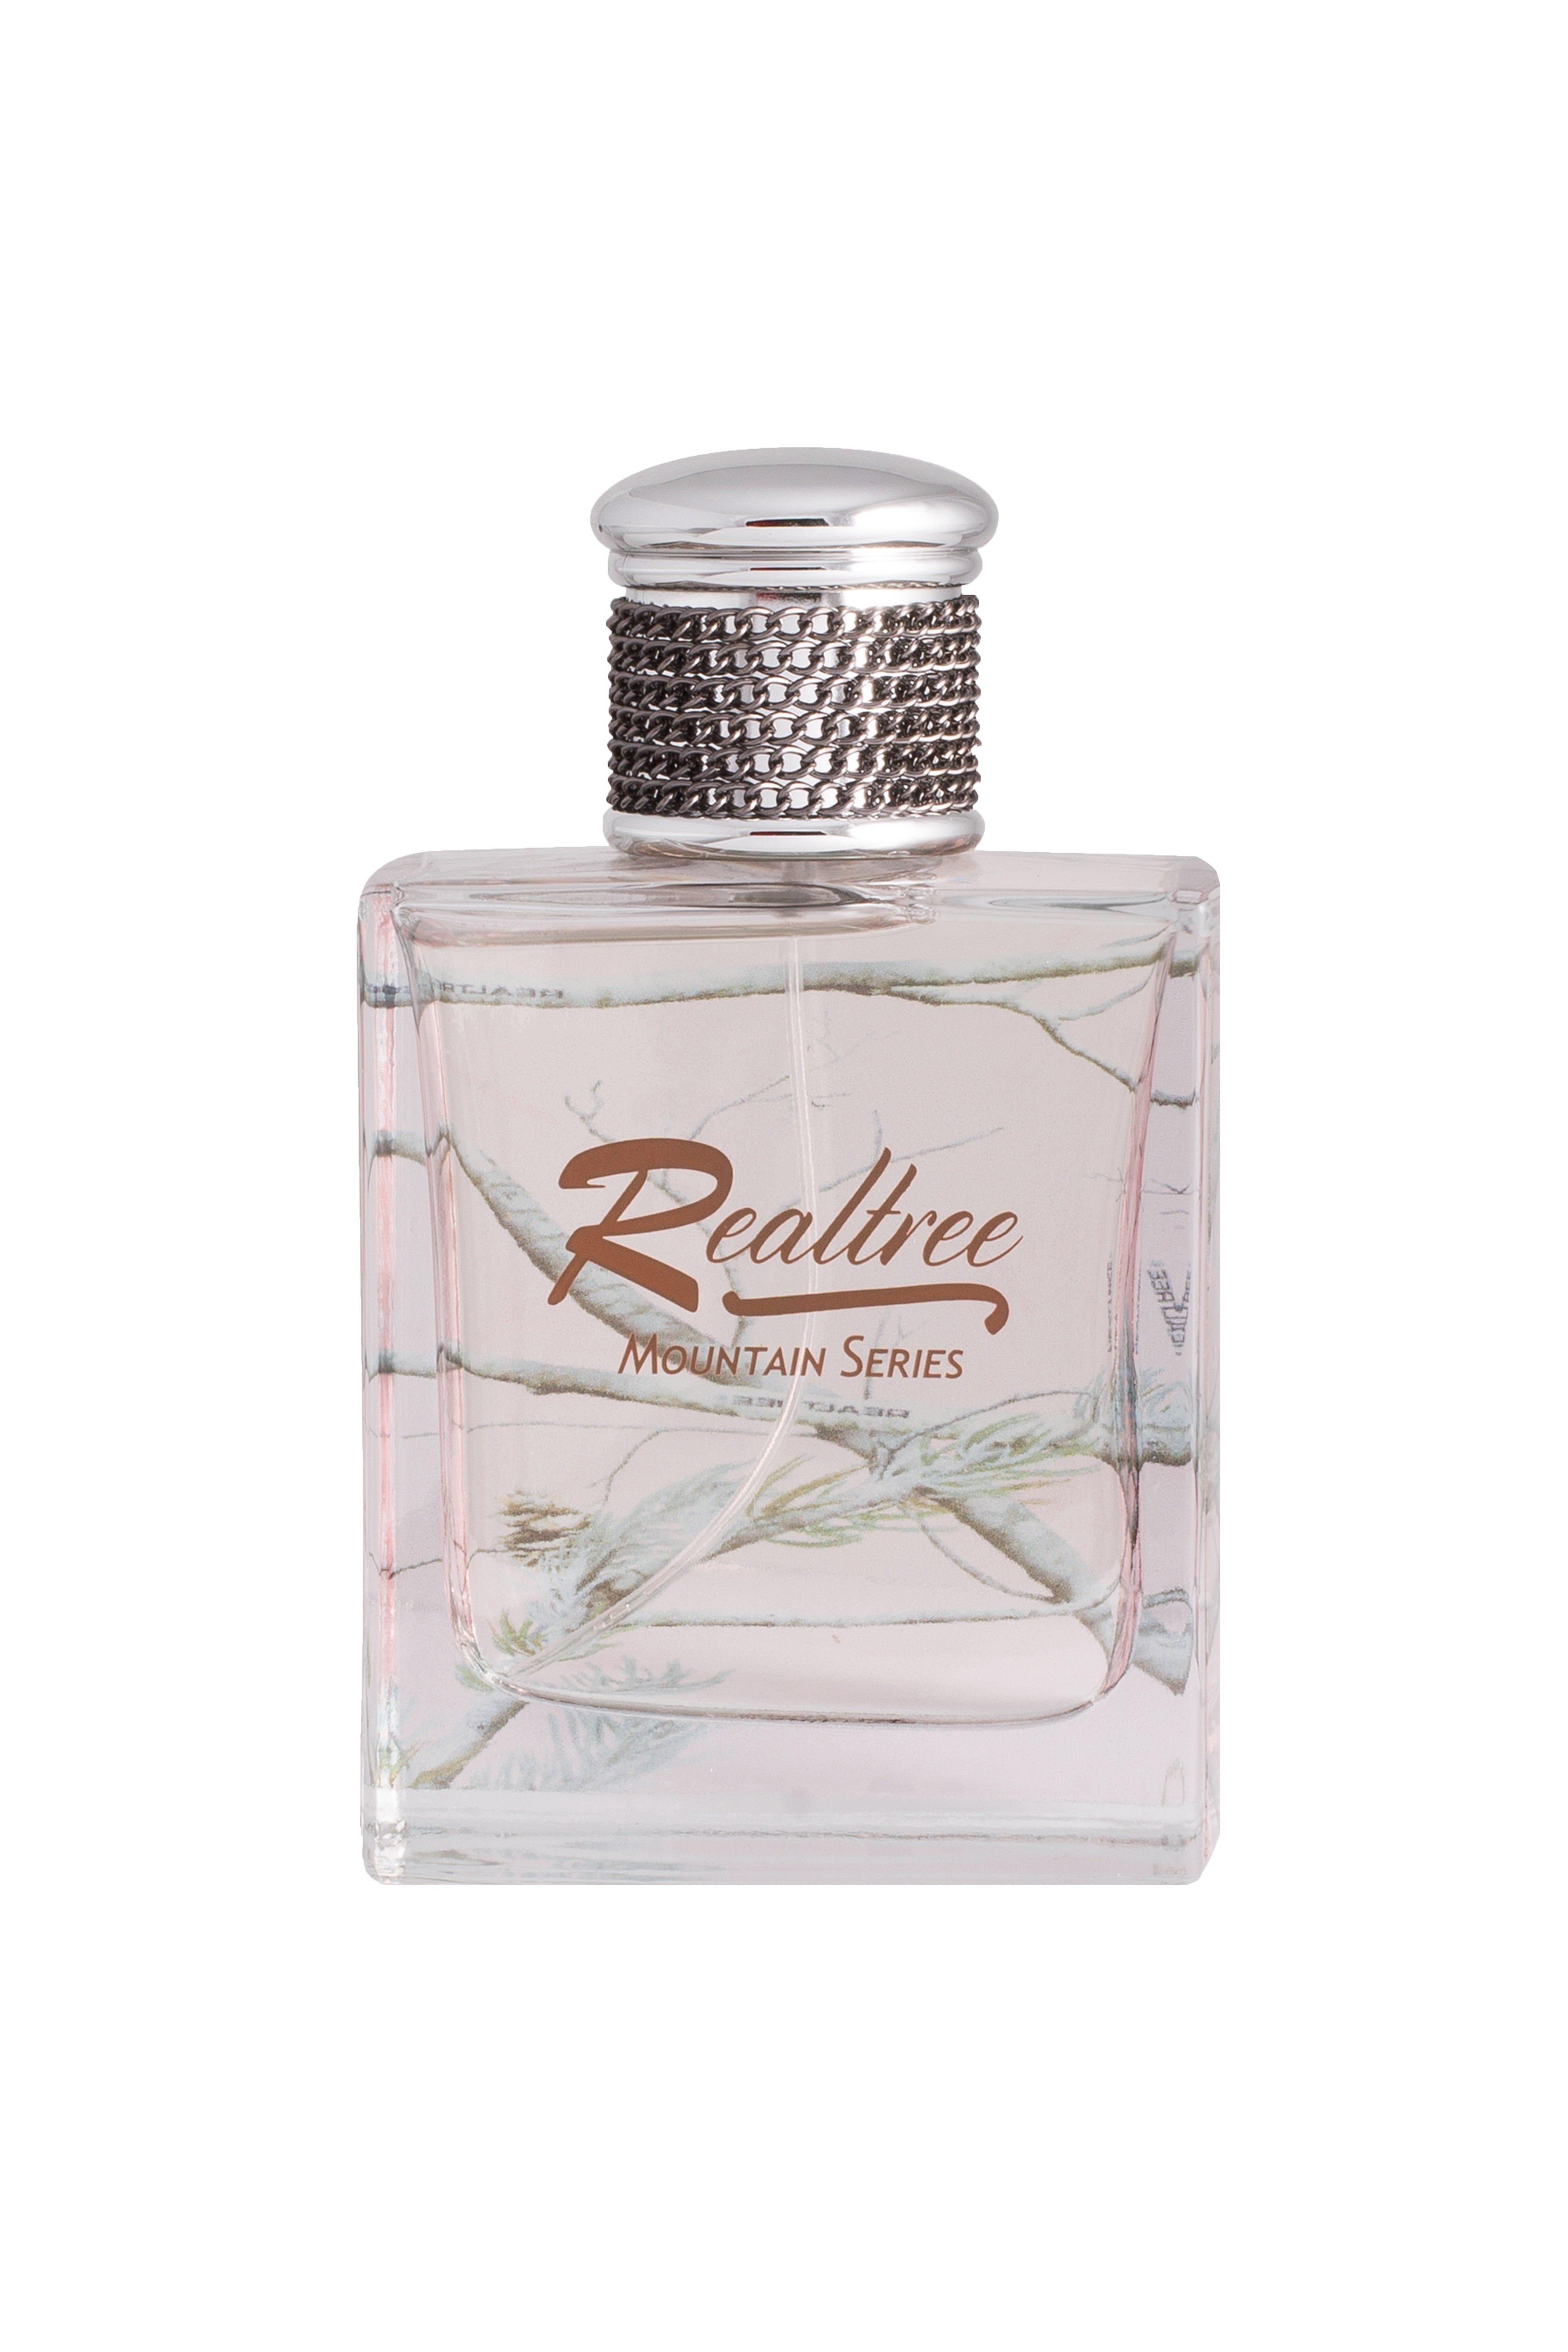 Realtree Mountain Series Fragrance for Her